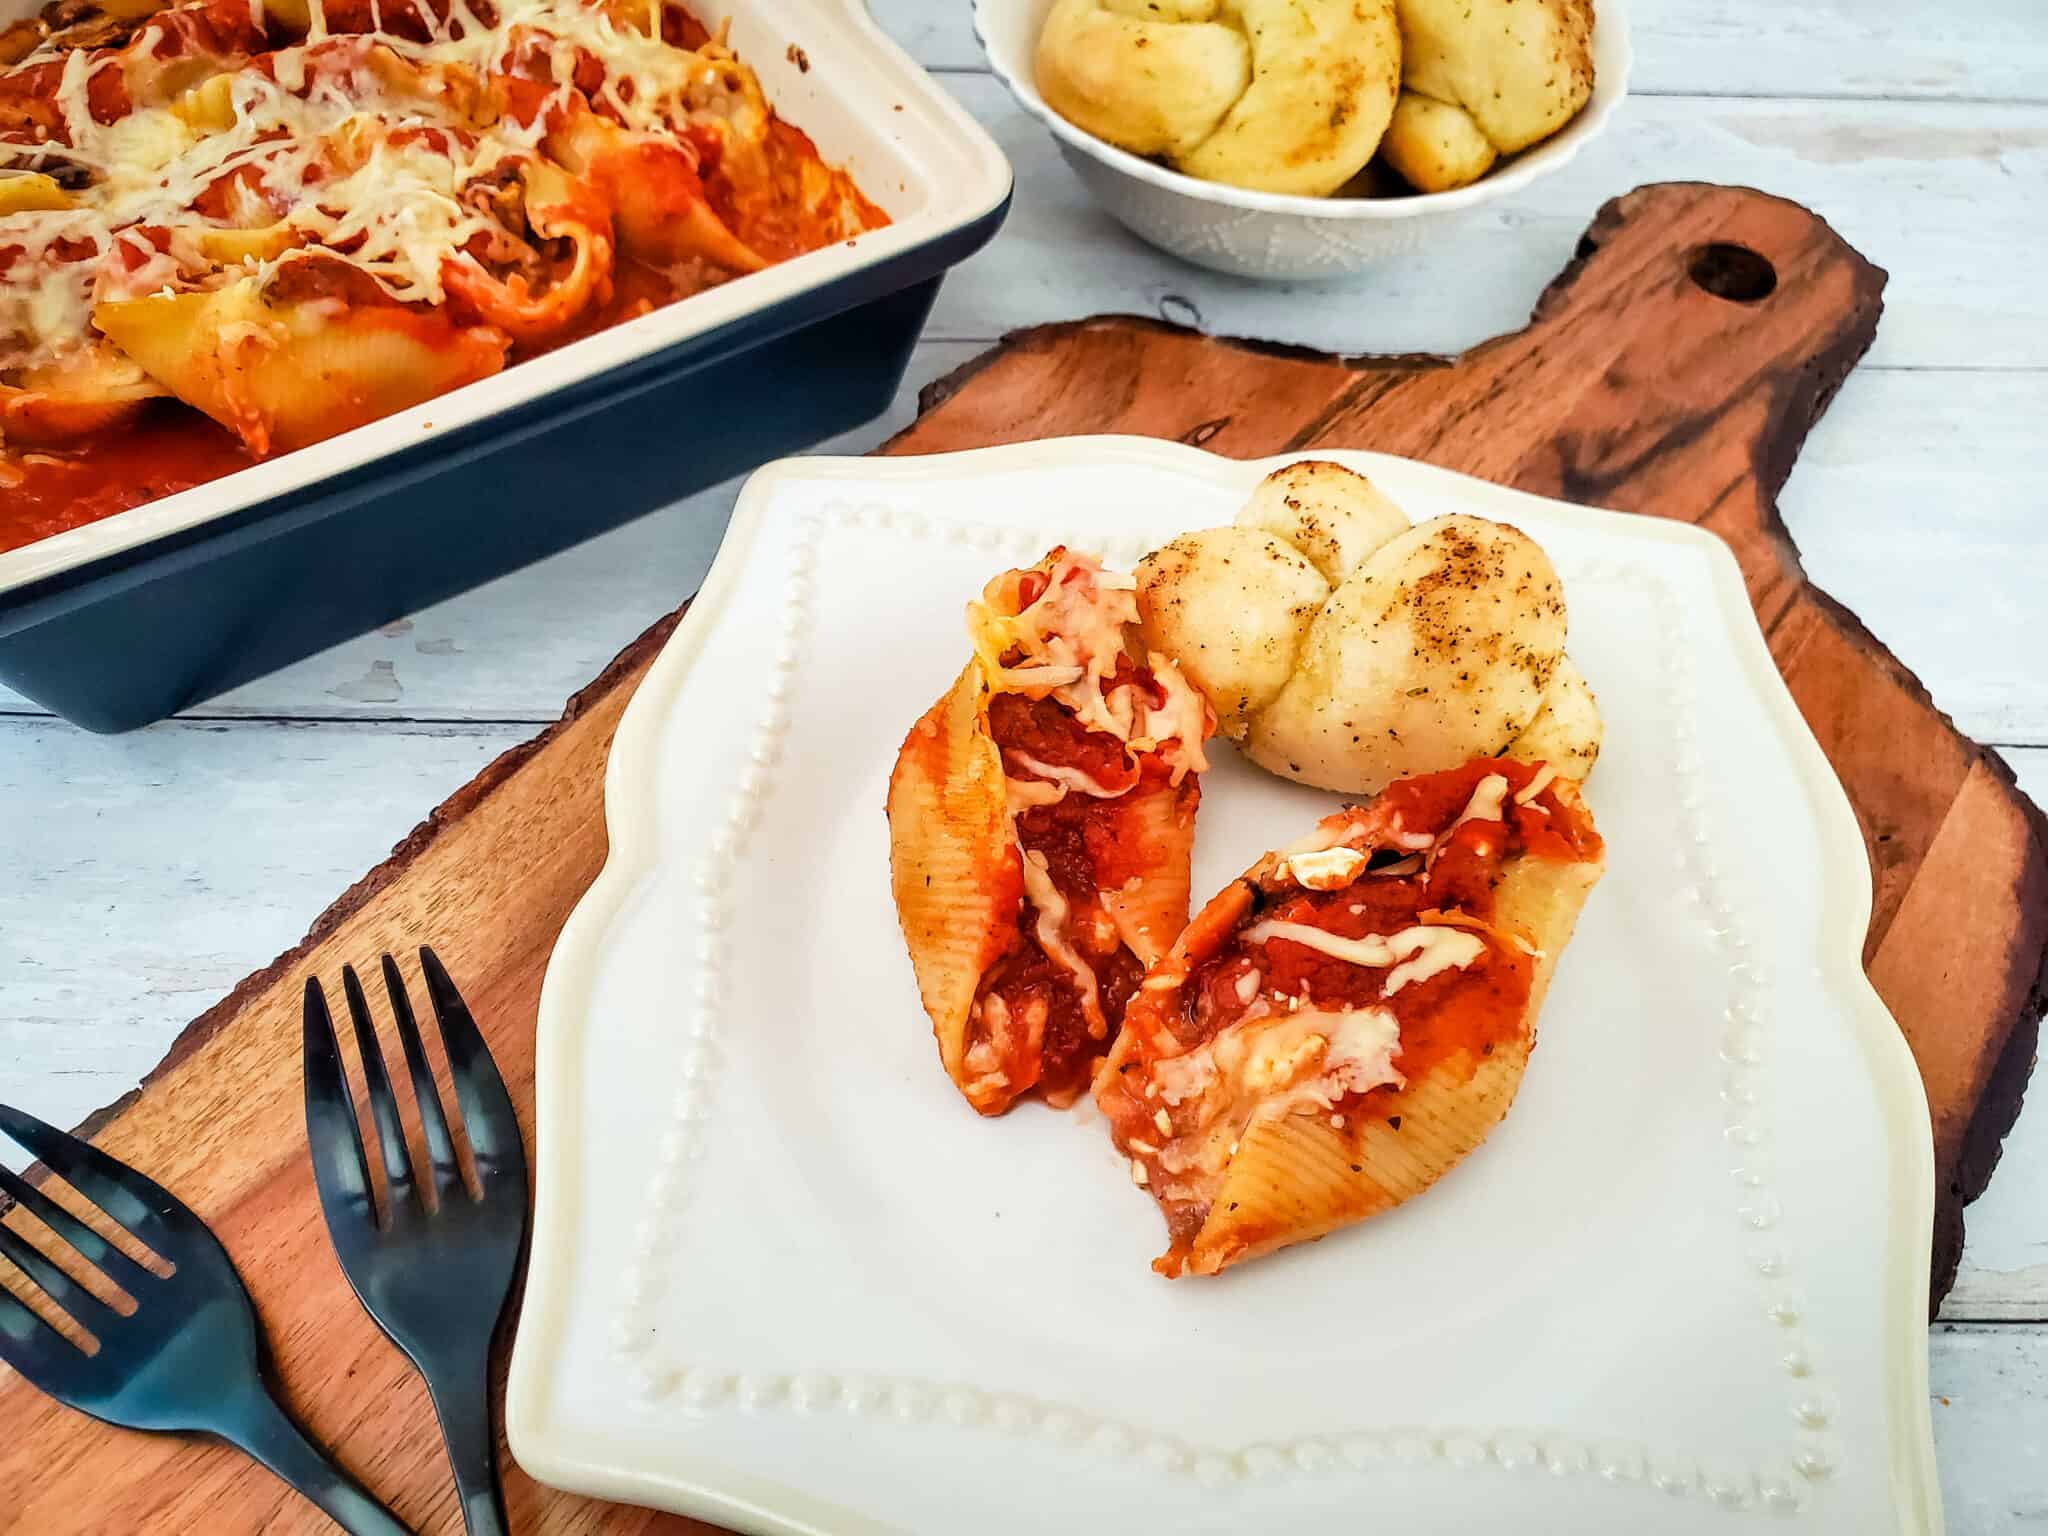 Looking for an easy and budget-friendly dinner recipe? These Italian stuffed pasta shells are so delicious.